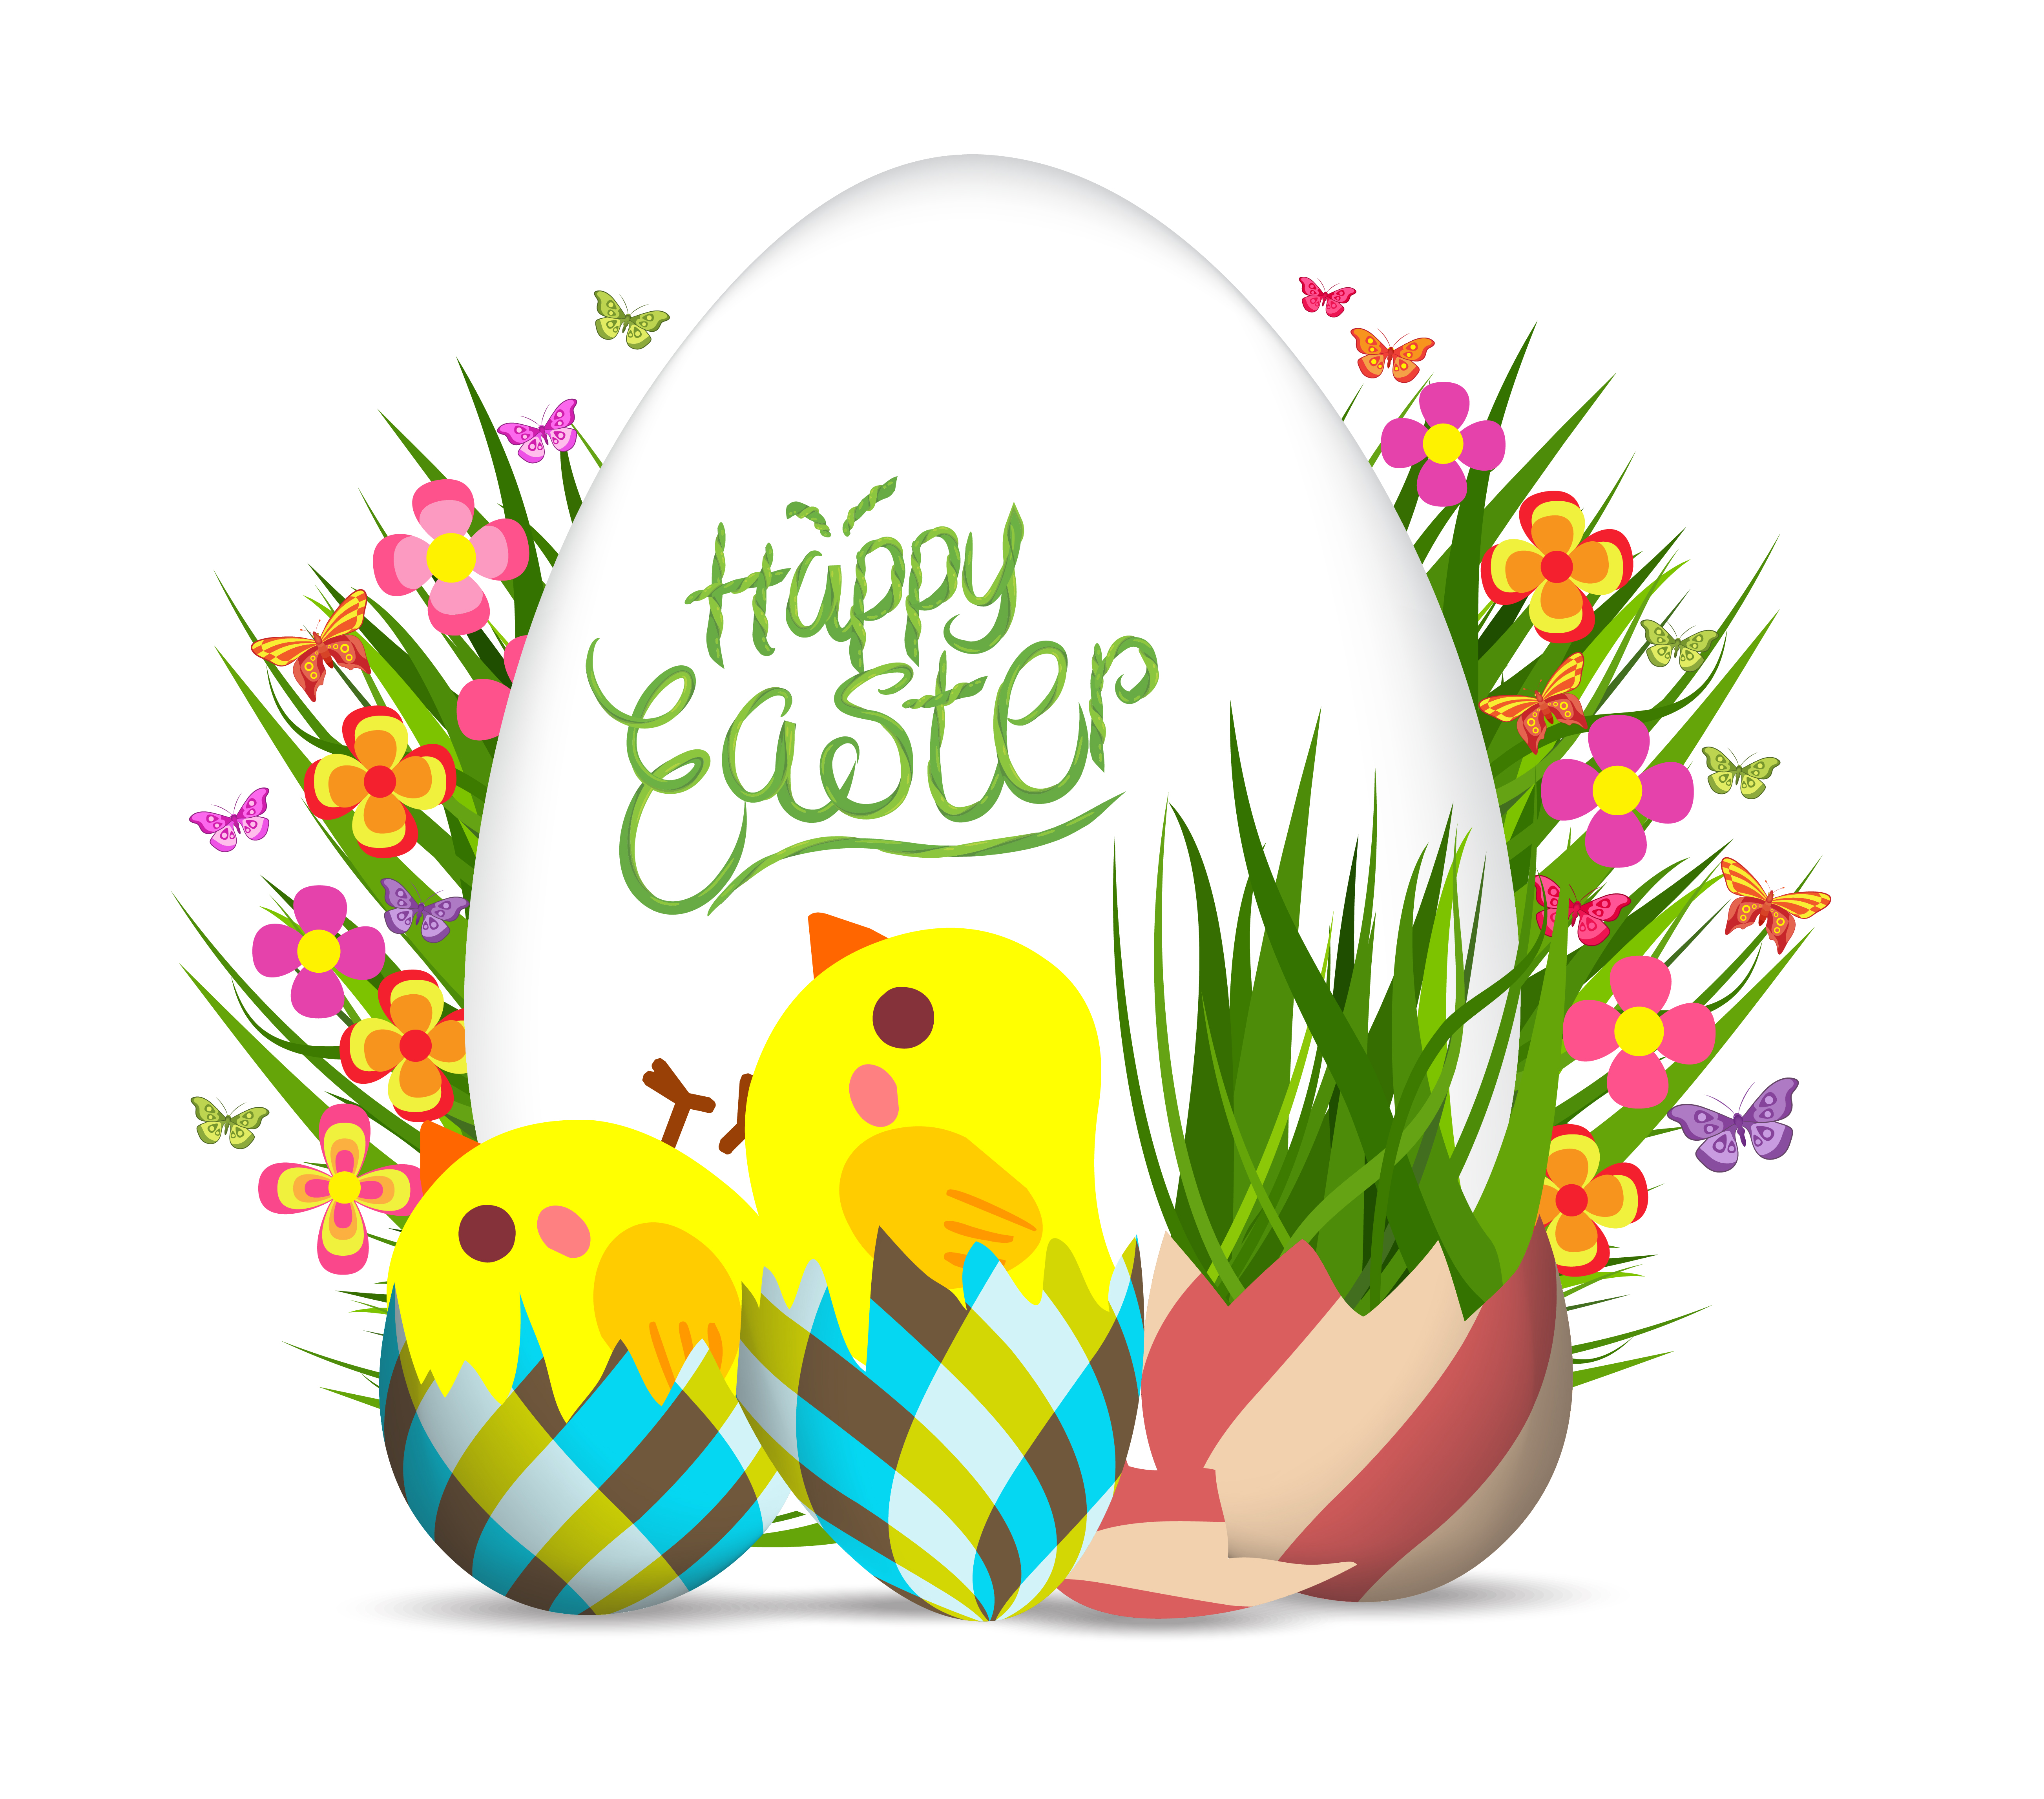 free download easter wishes images